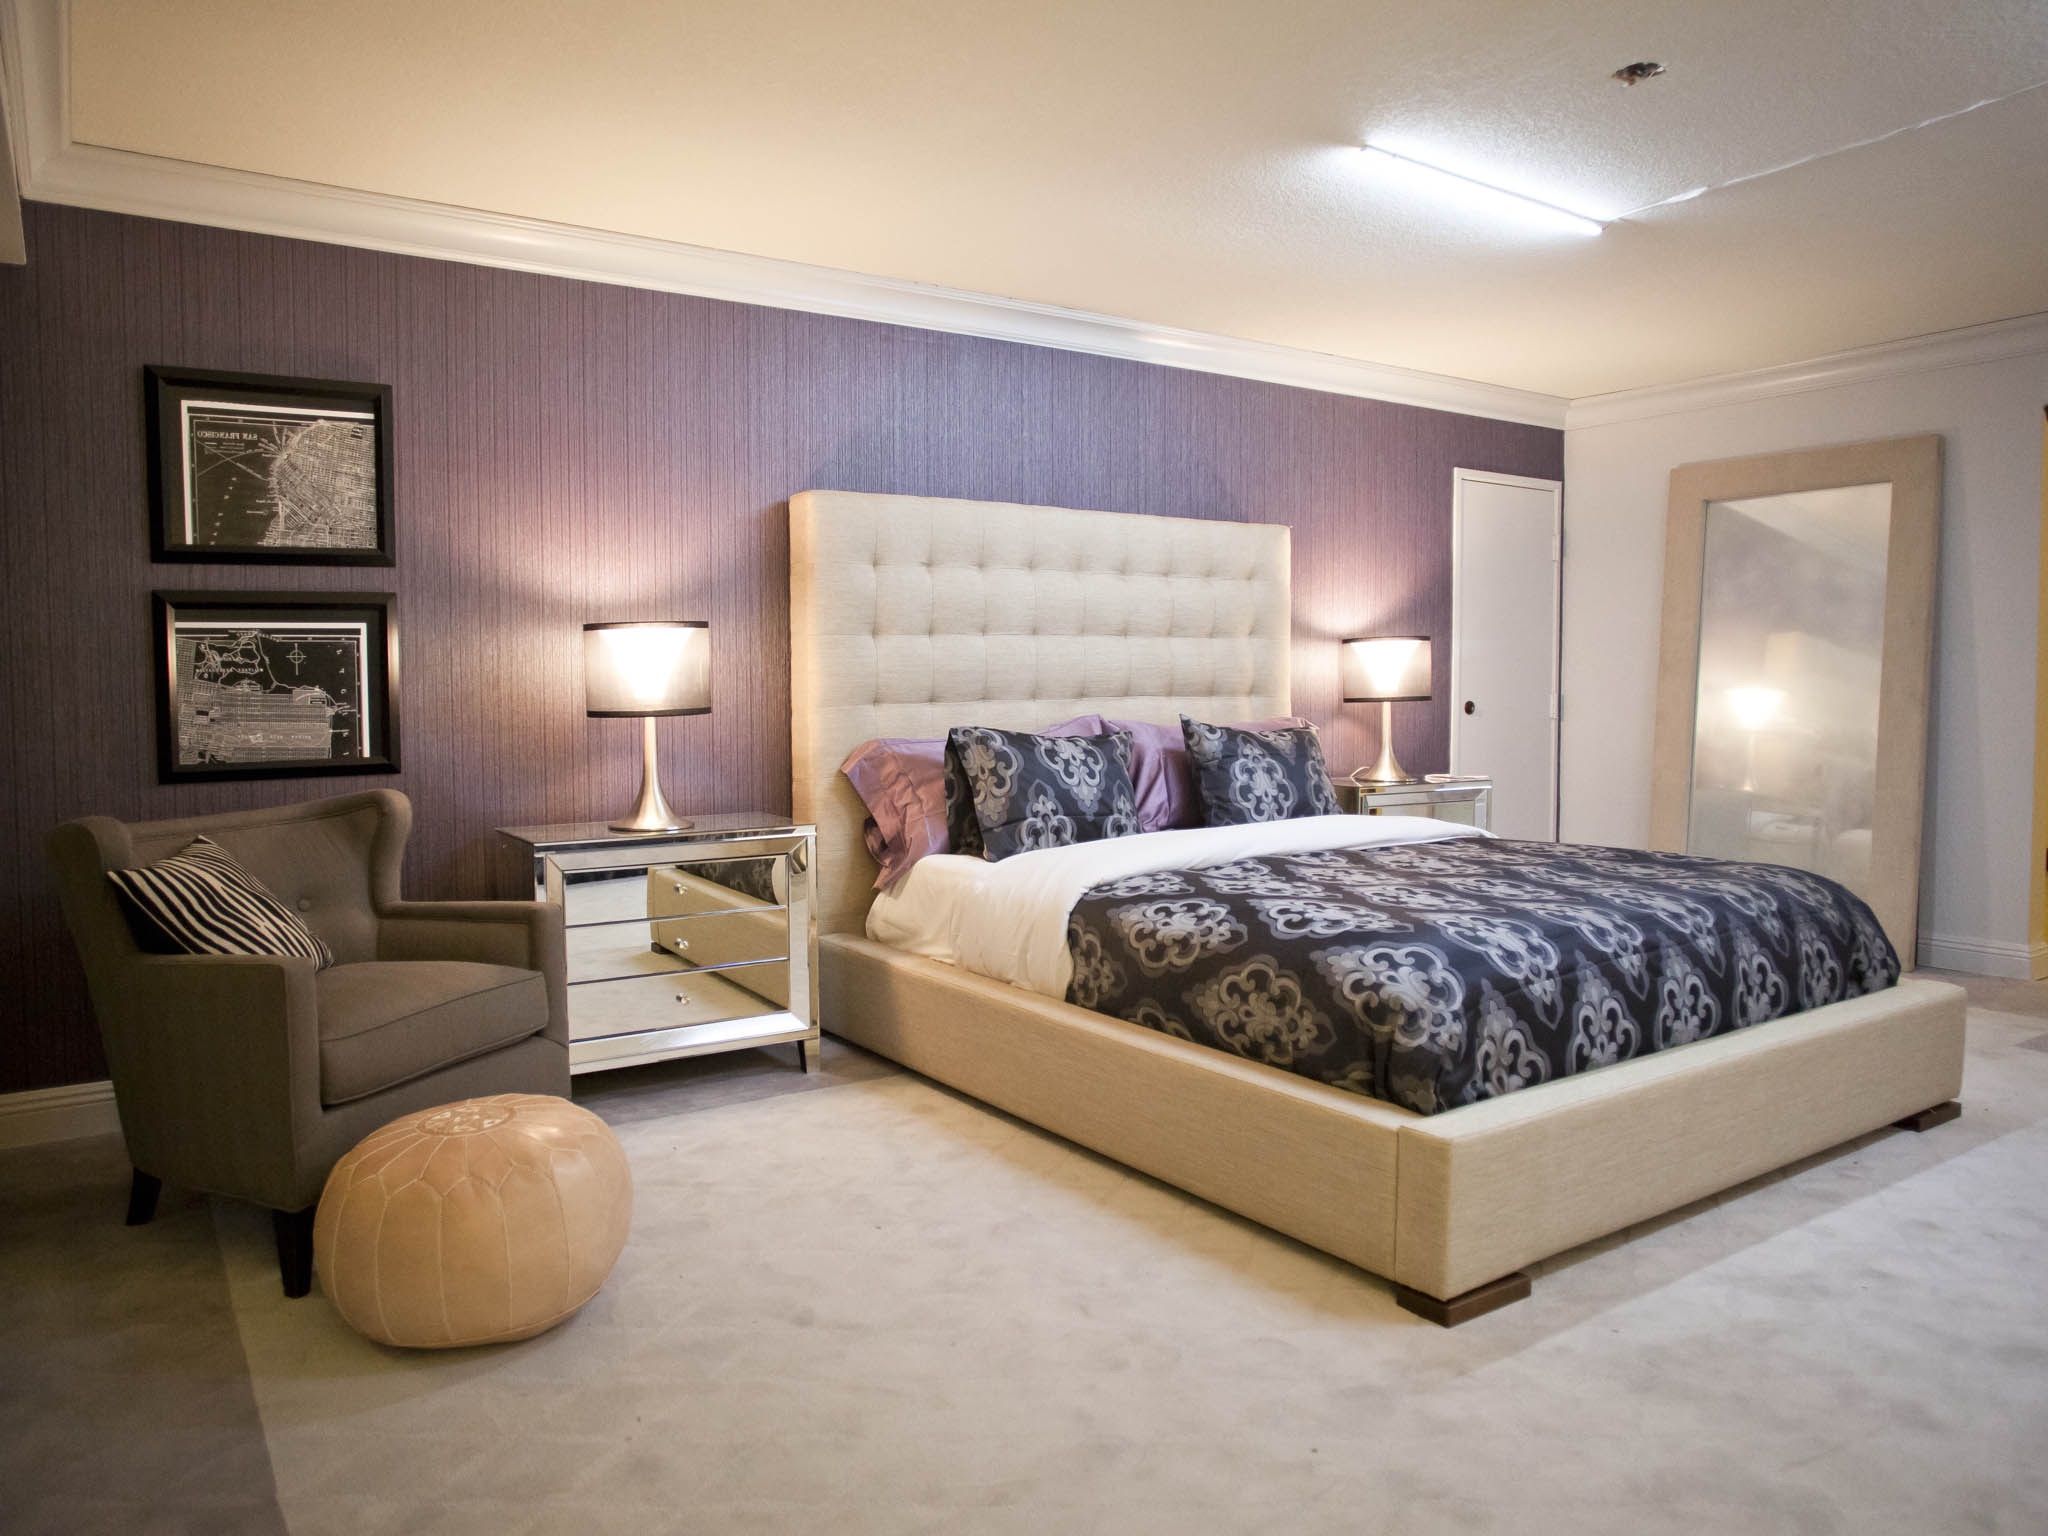 Modern Bedroom Decorating: Express Your Style And Comfort